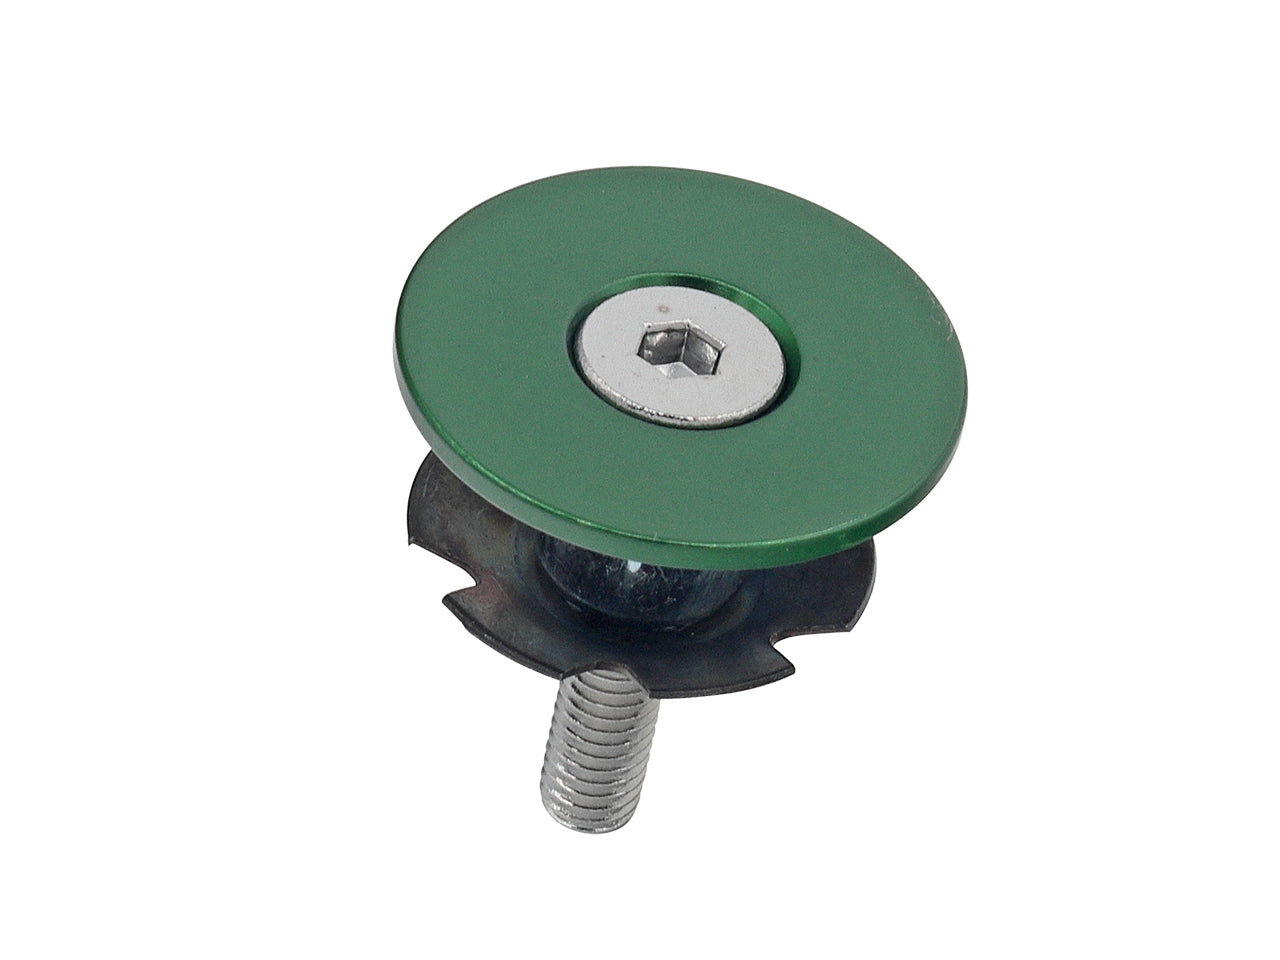 Bicycle steering top cap Anodized green